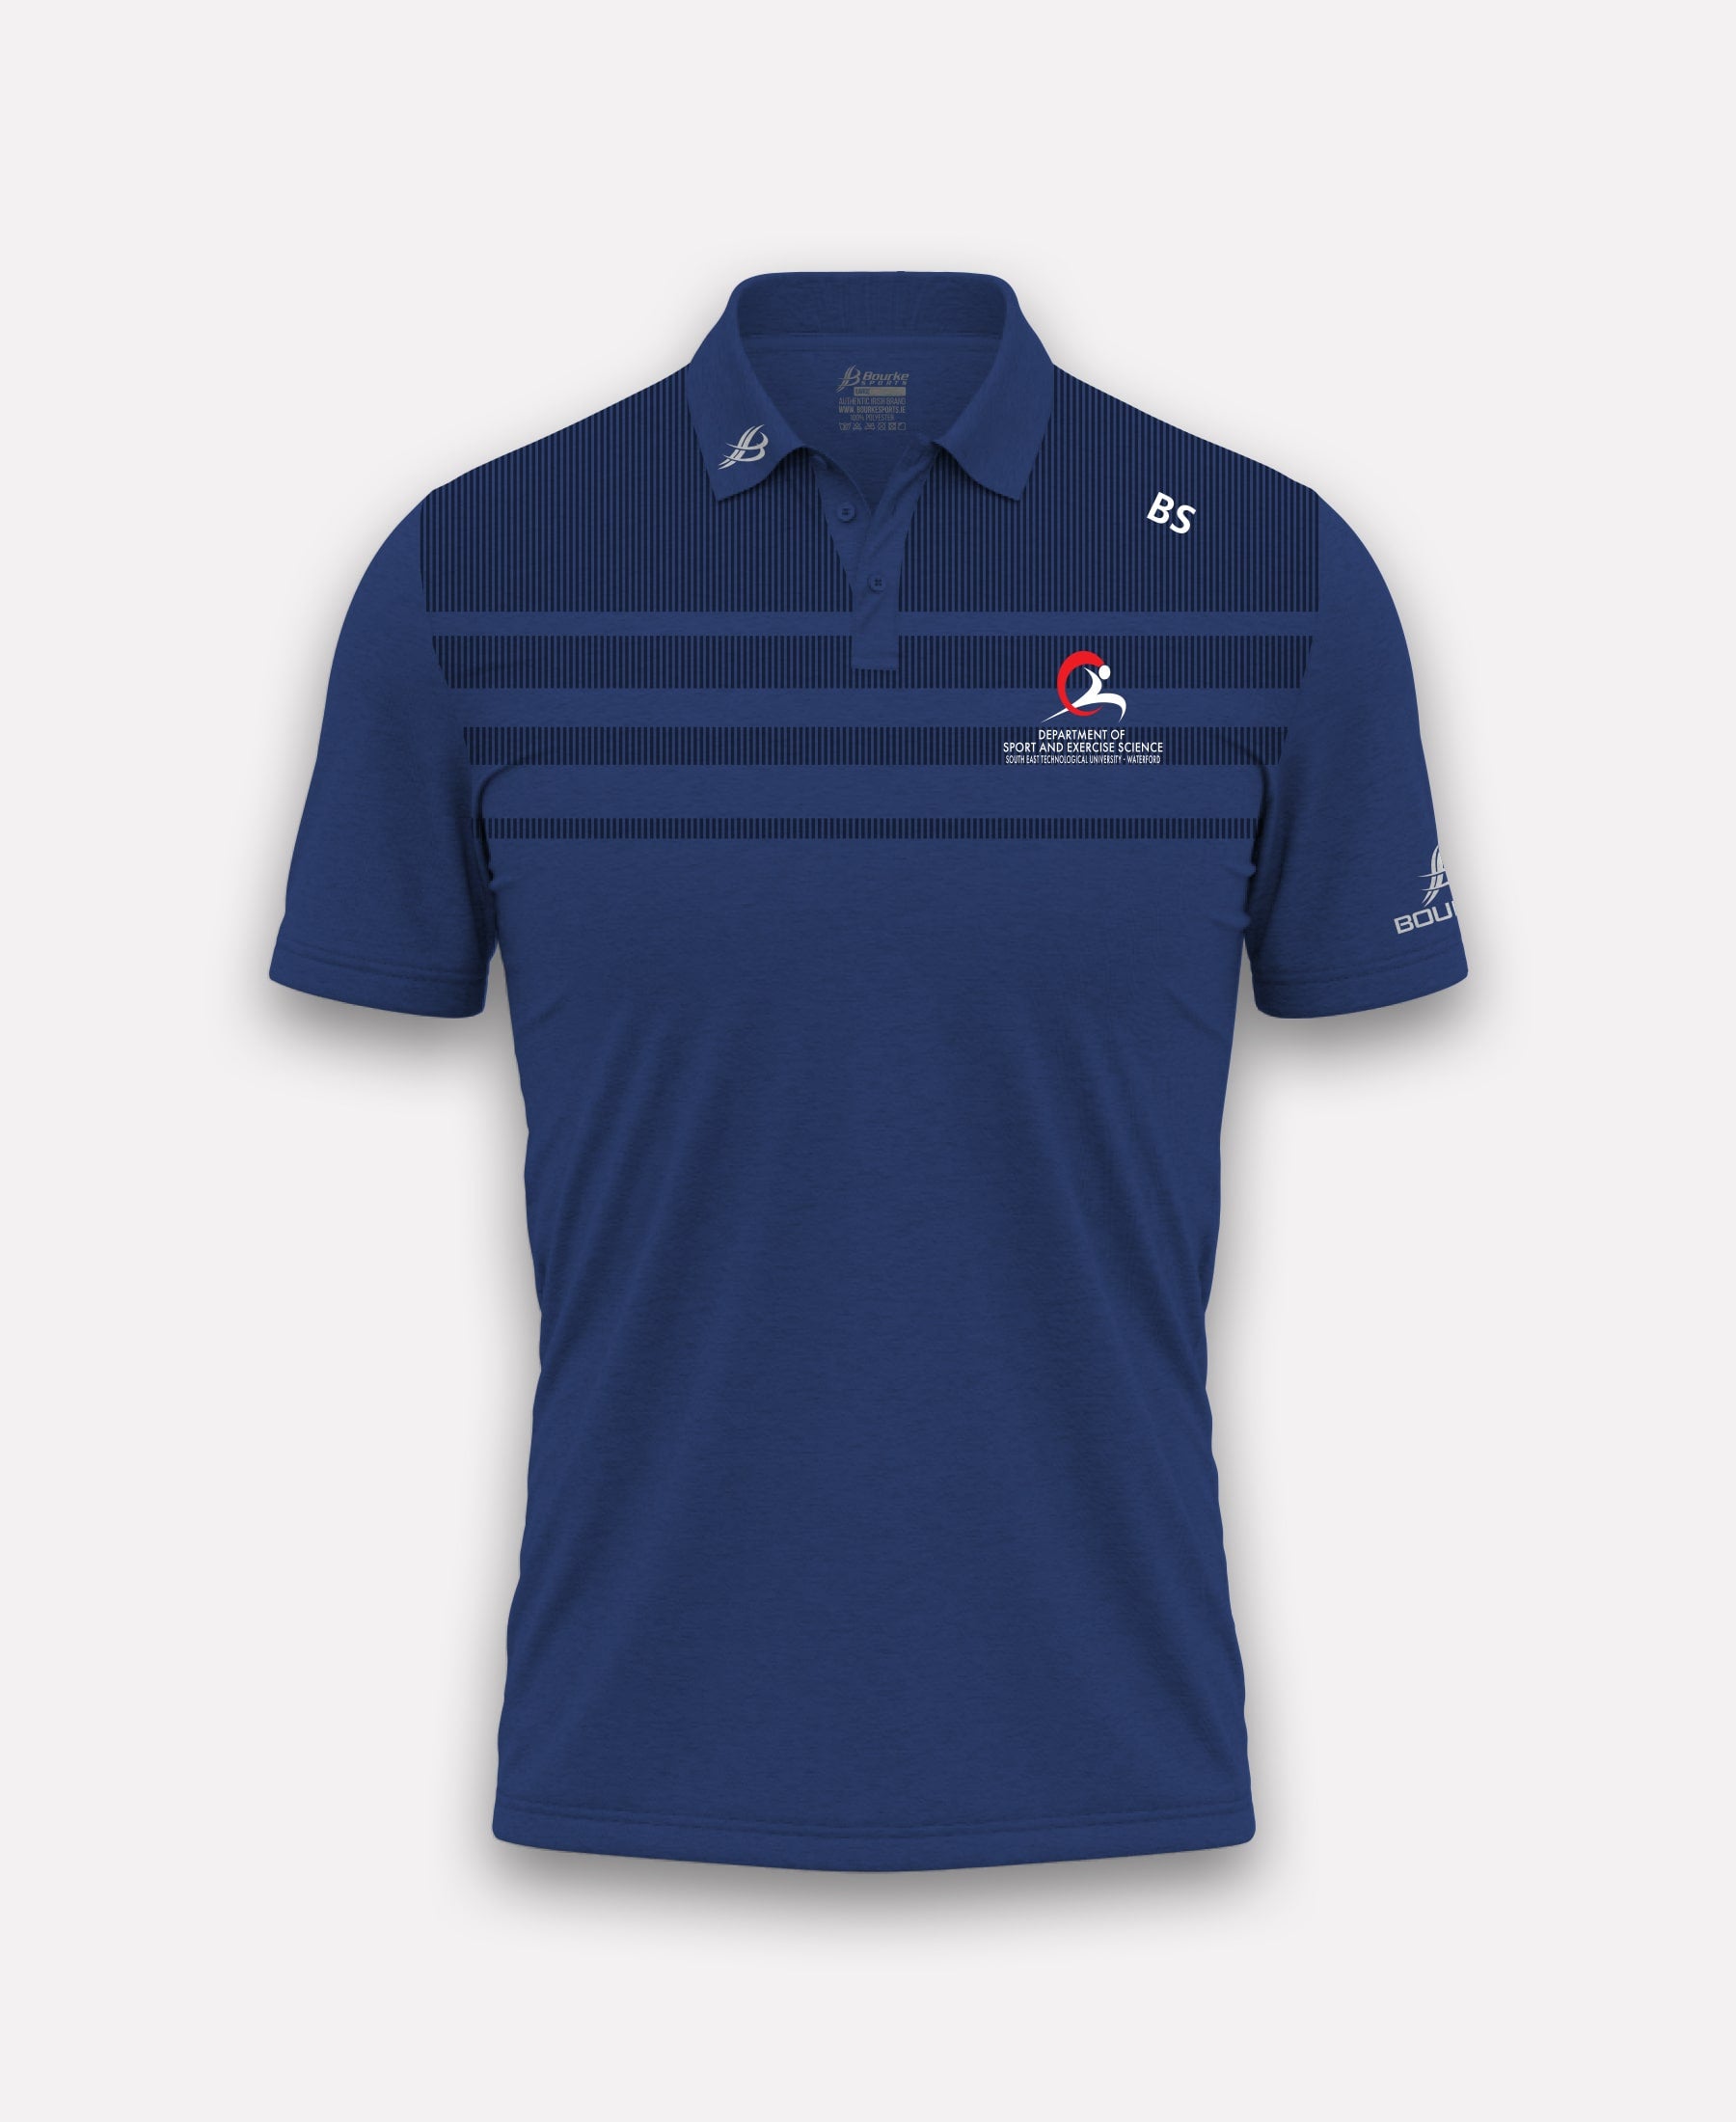 Department of Sport and Exercise Science SETU TACA Polo Shirt (Blue)